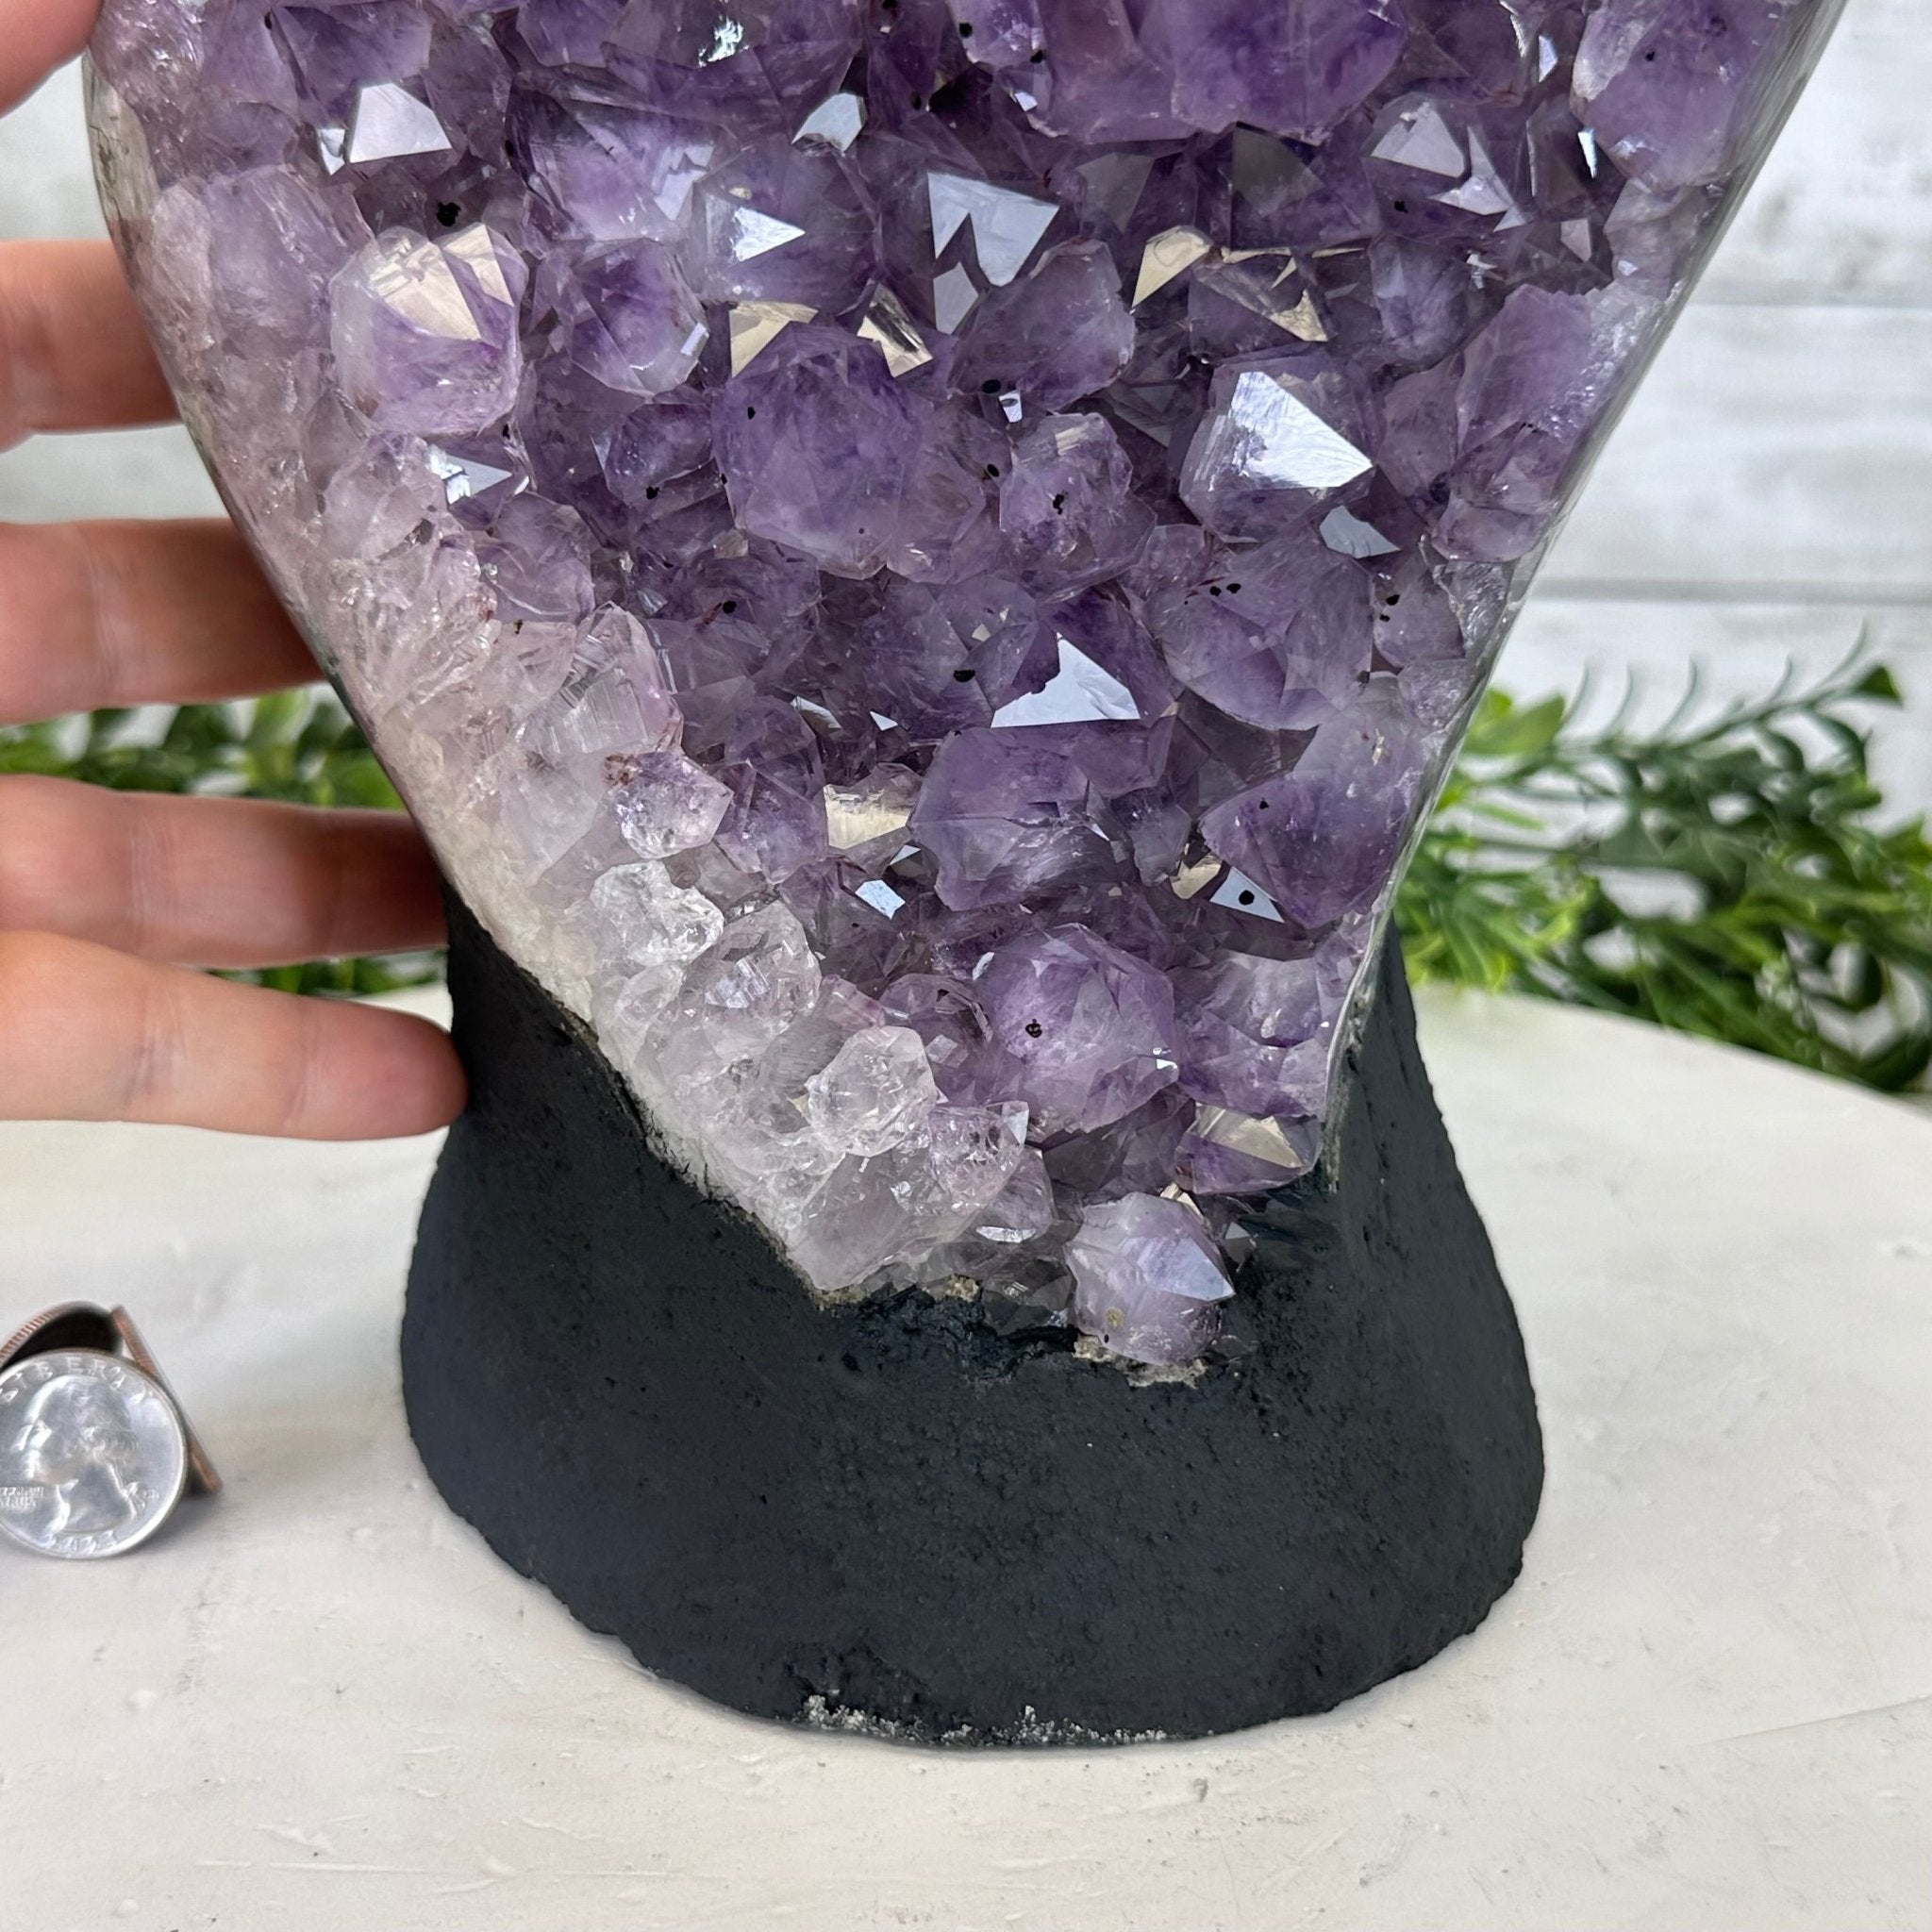 Extra Quality Amethyst Cluster, Cement Base, 11" Tall #5614-0115 - Brazil GemsBrazil GemsExtra Quality Amethyst Cluster, Cement Base, 11" Tall #5614-0115Clusters on Cement Bases5614-0115